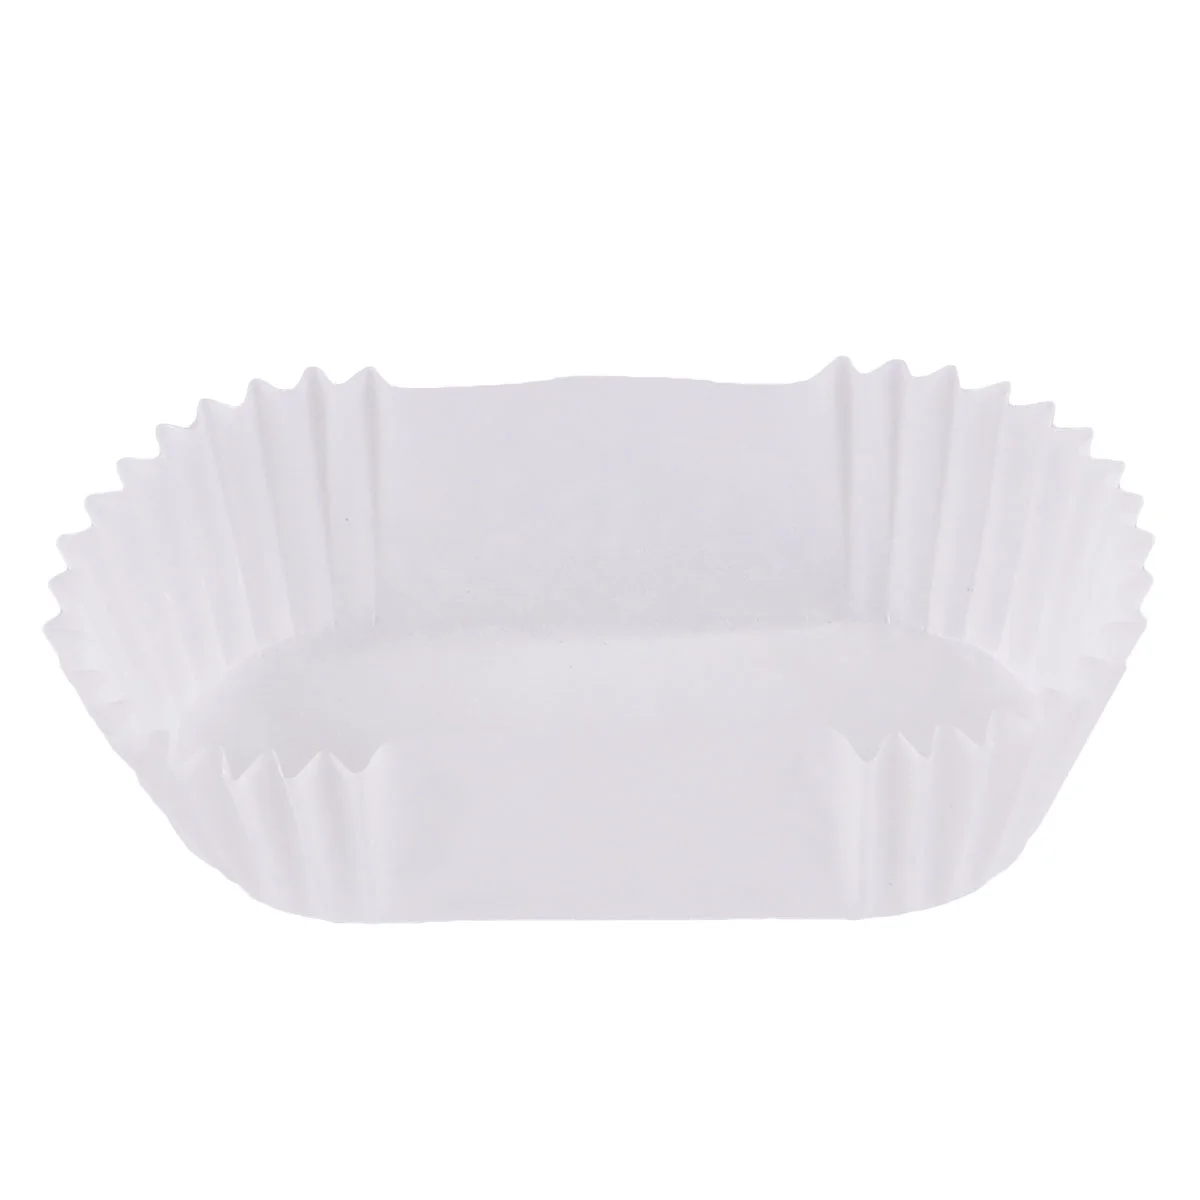 

1000Pcs Oval Cake Paper Cup Tray Shape Cups Liners Loaf Bread Cups Grease Proof Cupcake Liners for Muffins Cupcakes ( White )